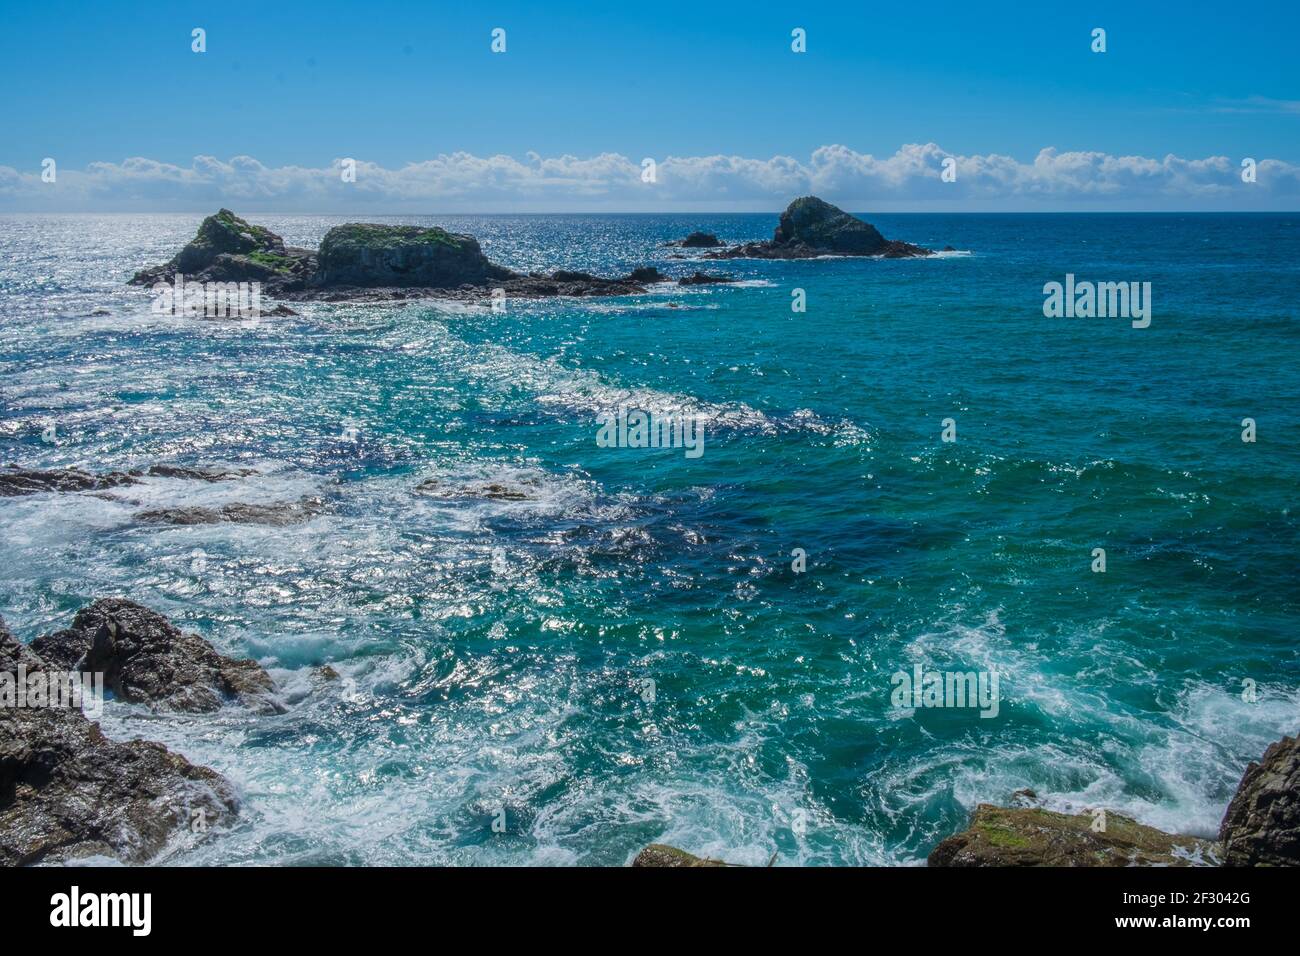 Waves breaking on rocks and cliffs Stock Photo